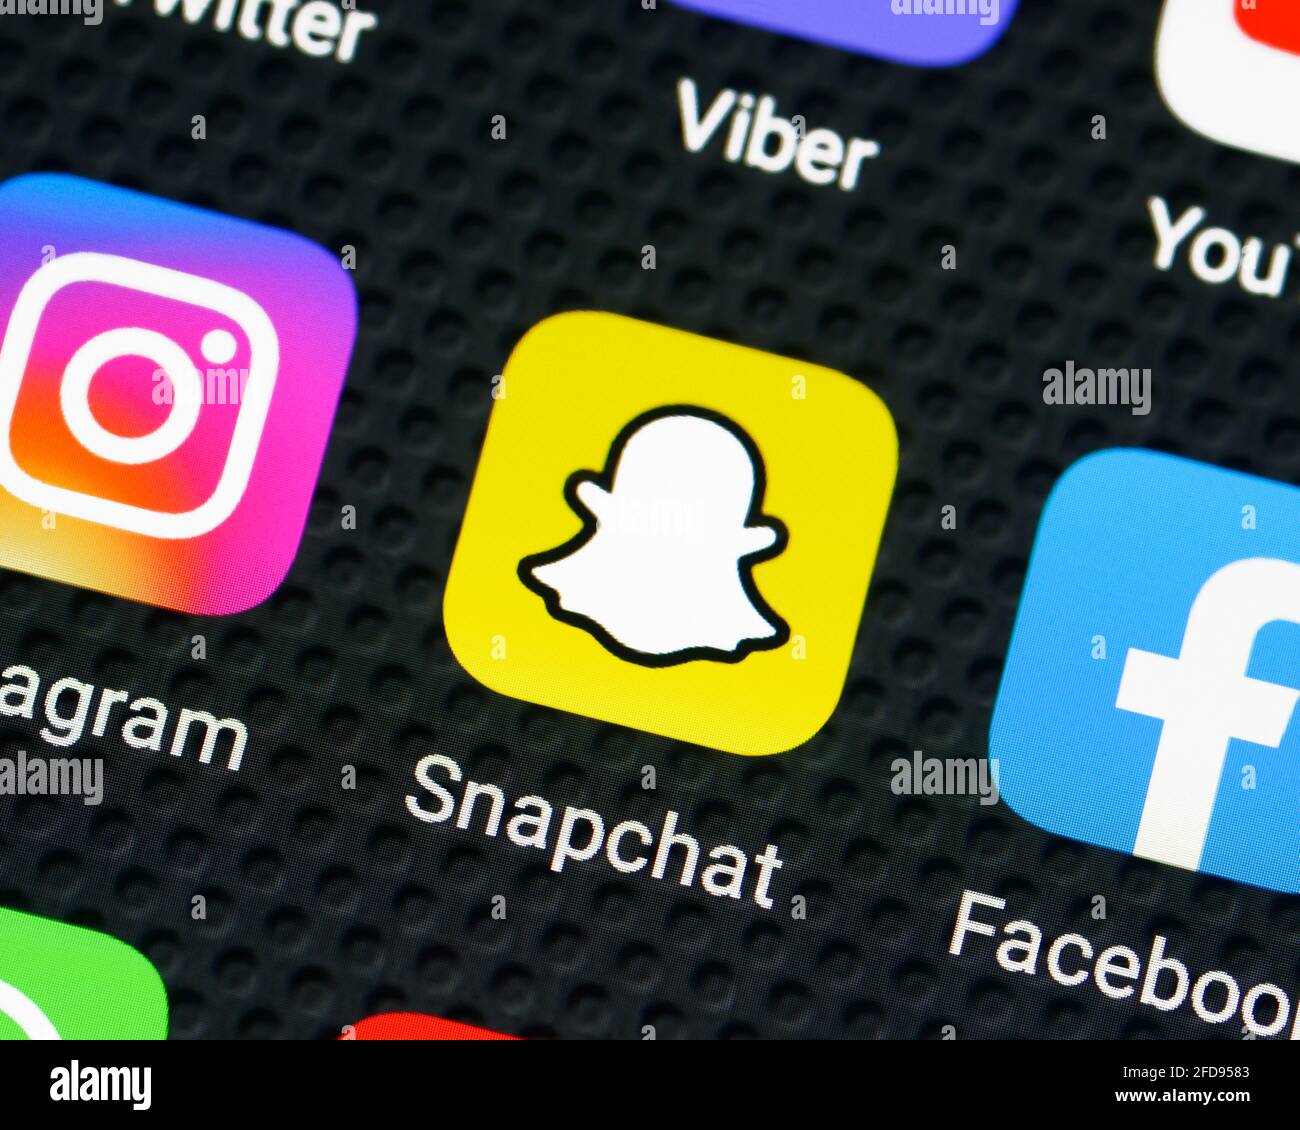 Snapchat App Icon on a Smartphone, Close Up Stock Photo